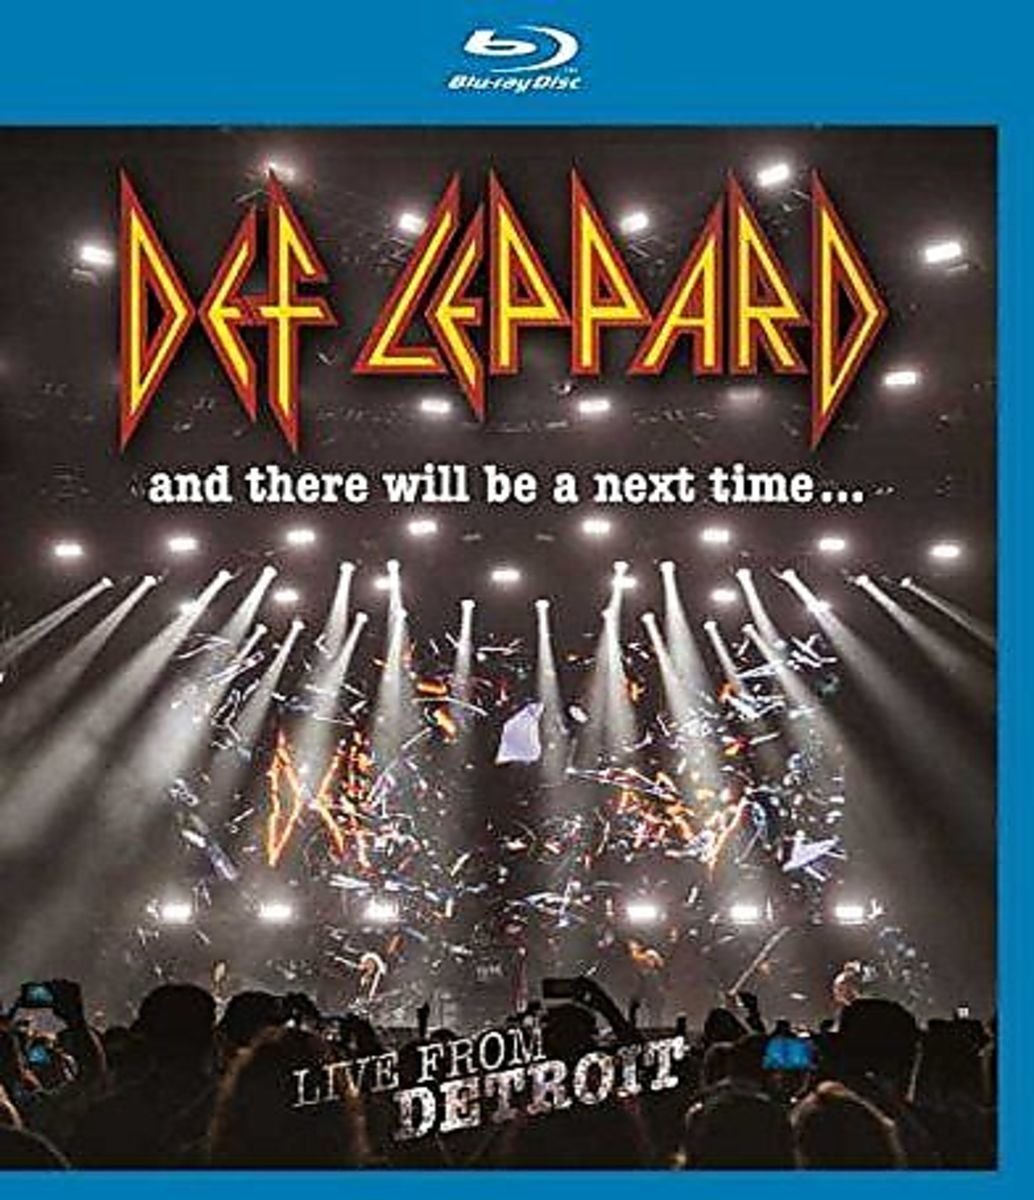 And there will be a next time - Live from Detroit (Blu Ray Disc) | Def Leppard